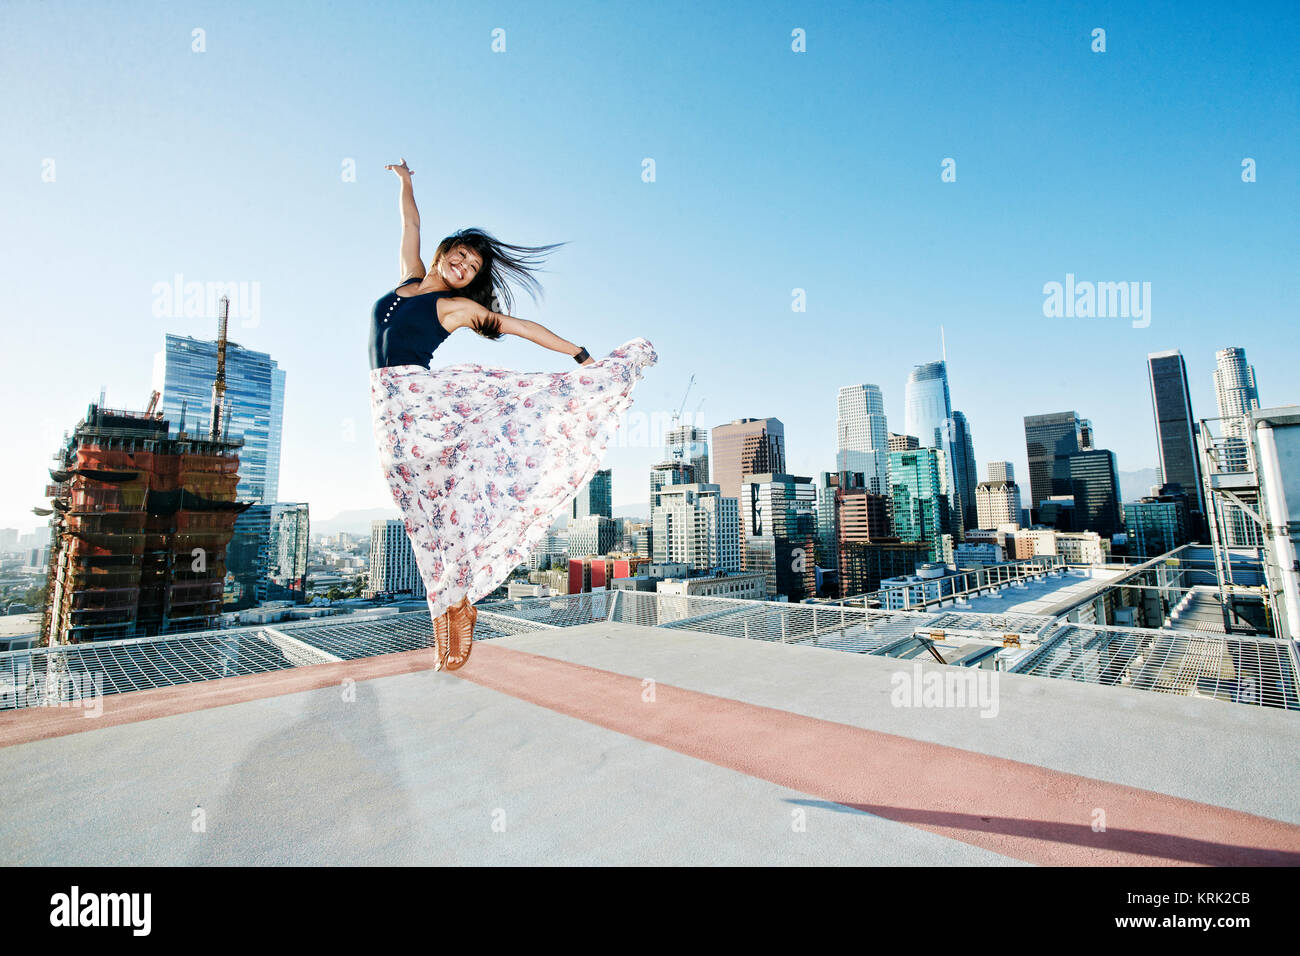 Asian woman jumping on urban rooftop Stock Photo